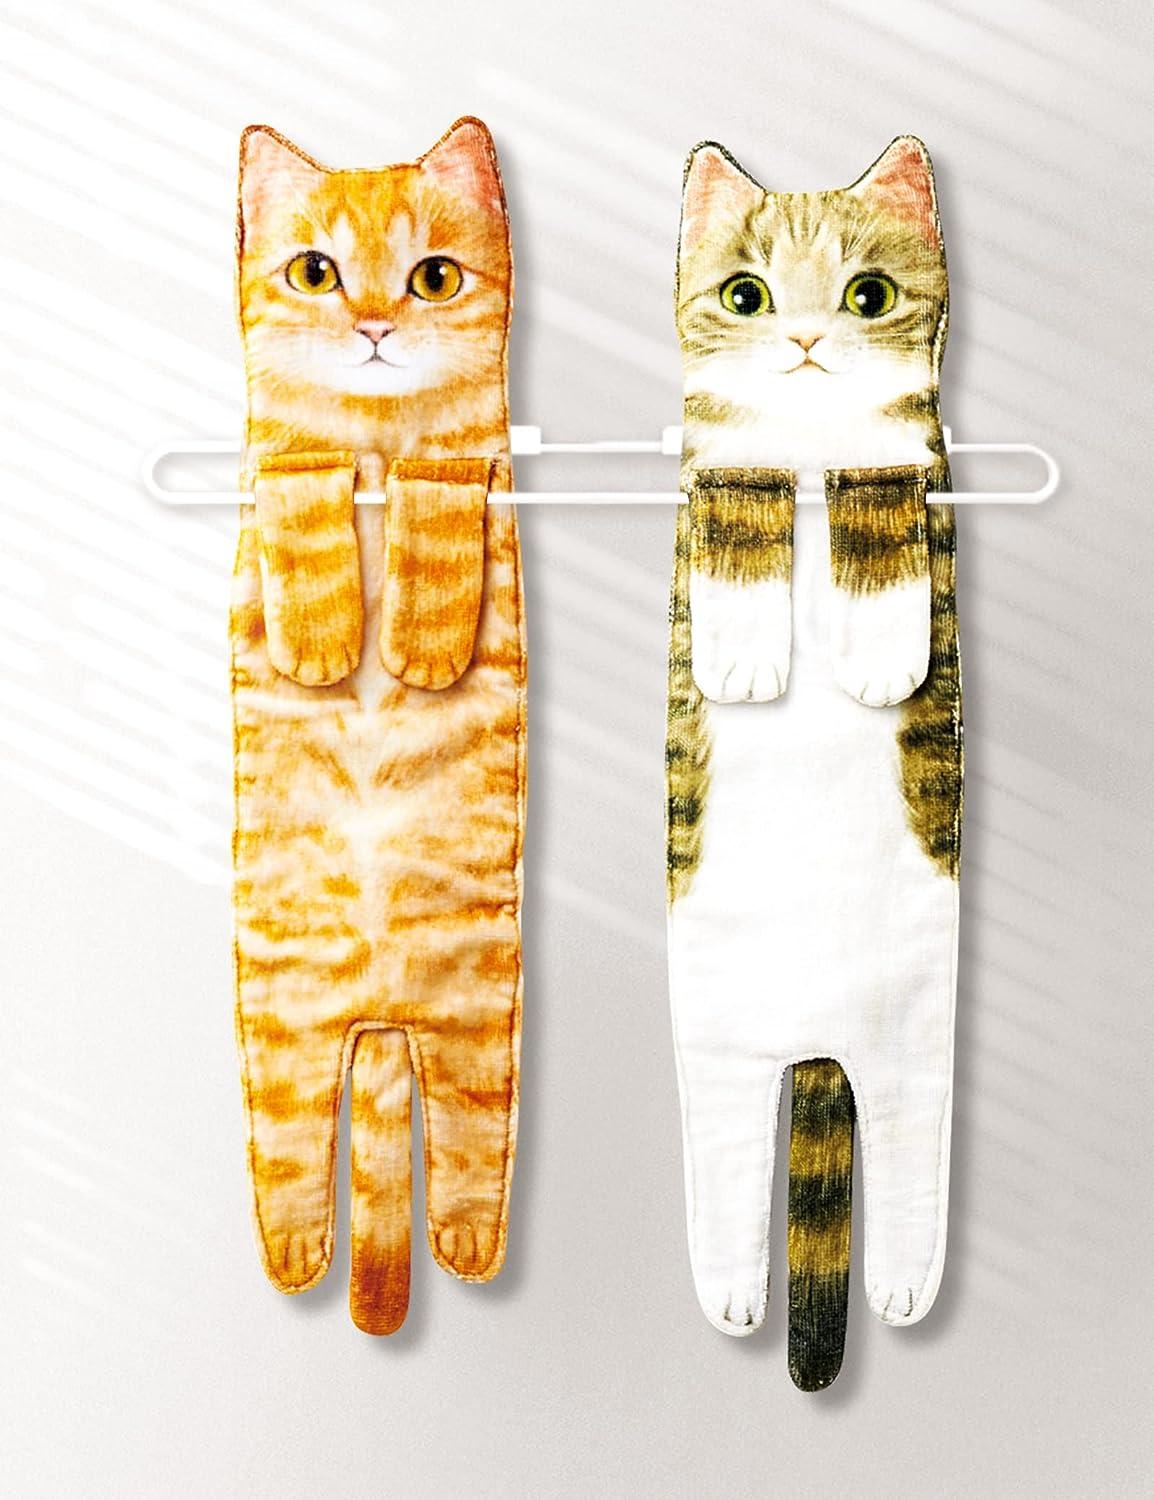 Funny Hand Towels For Bathroom Kitchen Cute Cat Decor Towels Absorbent Soft